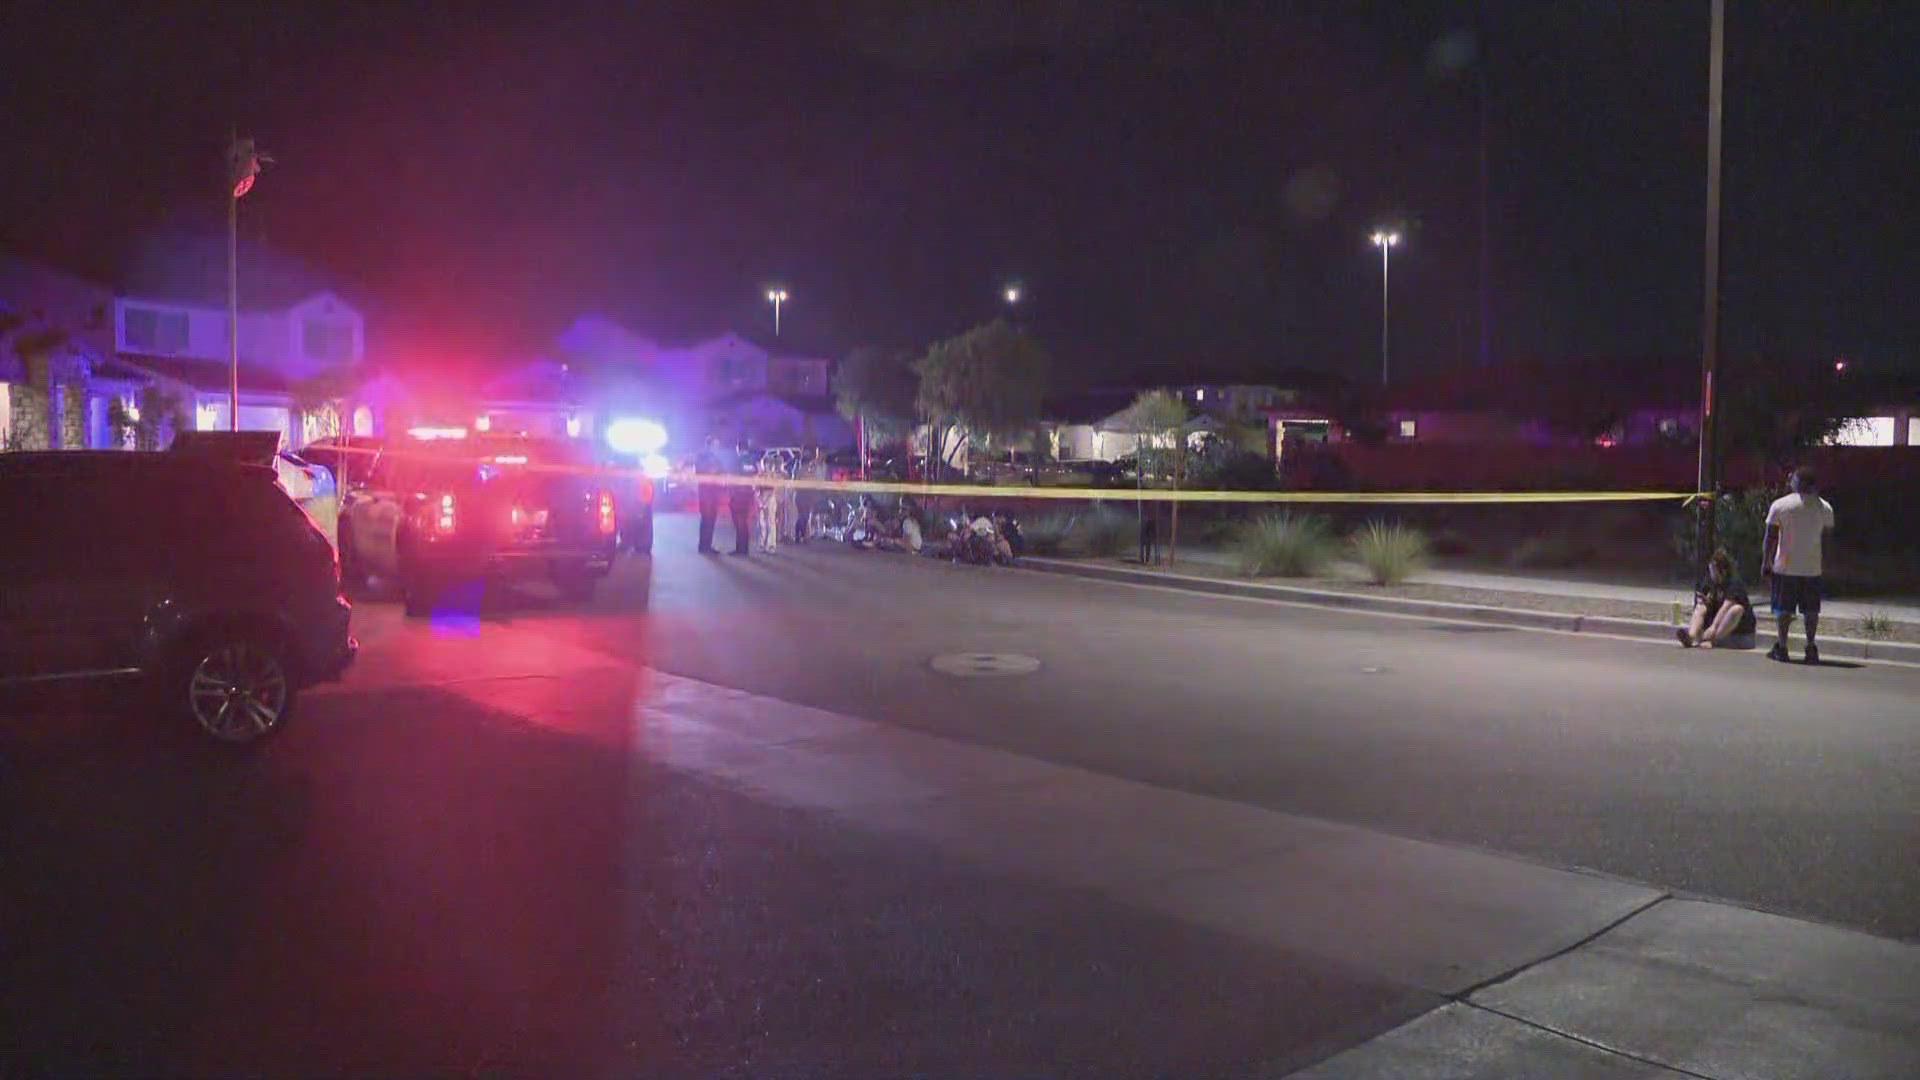 A person is injured after a shooting Tuesday night in Surprise near Cotton Lane and Cactus Road.